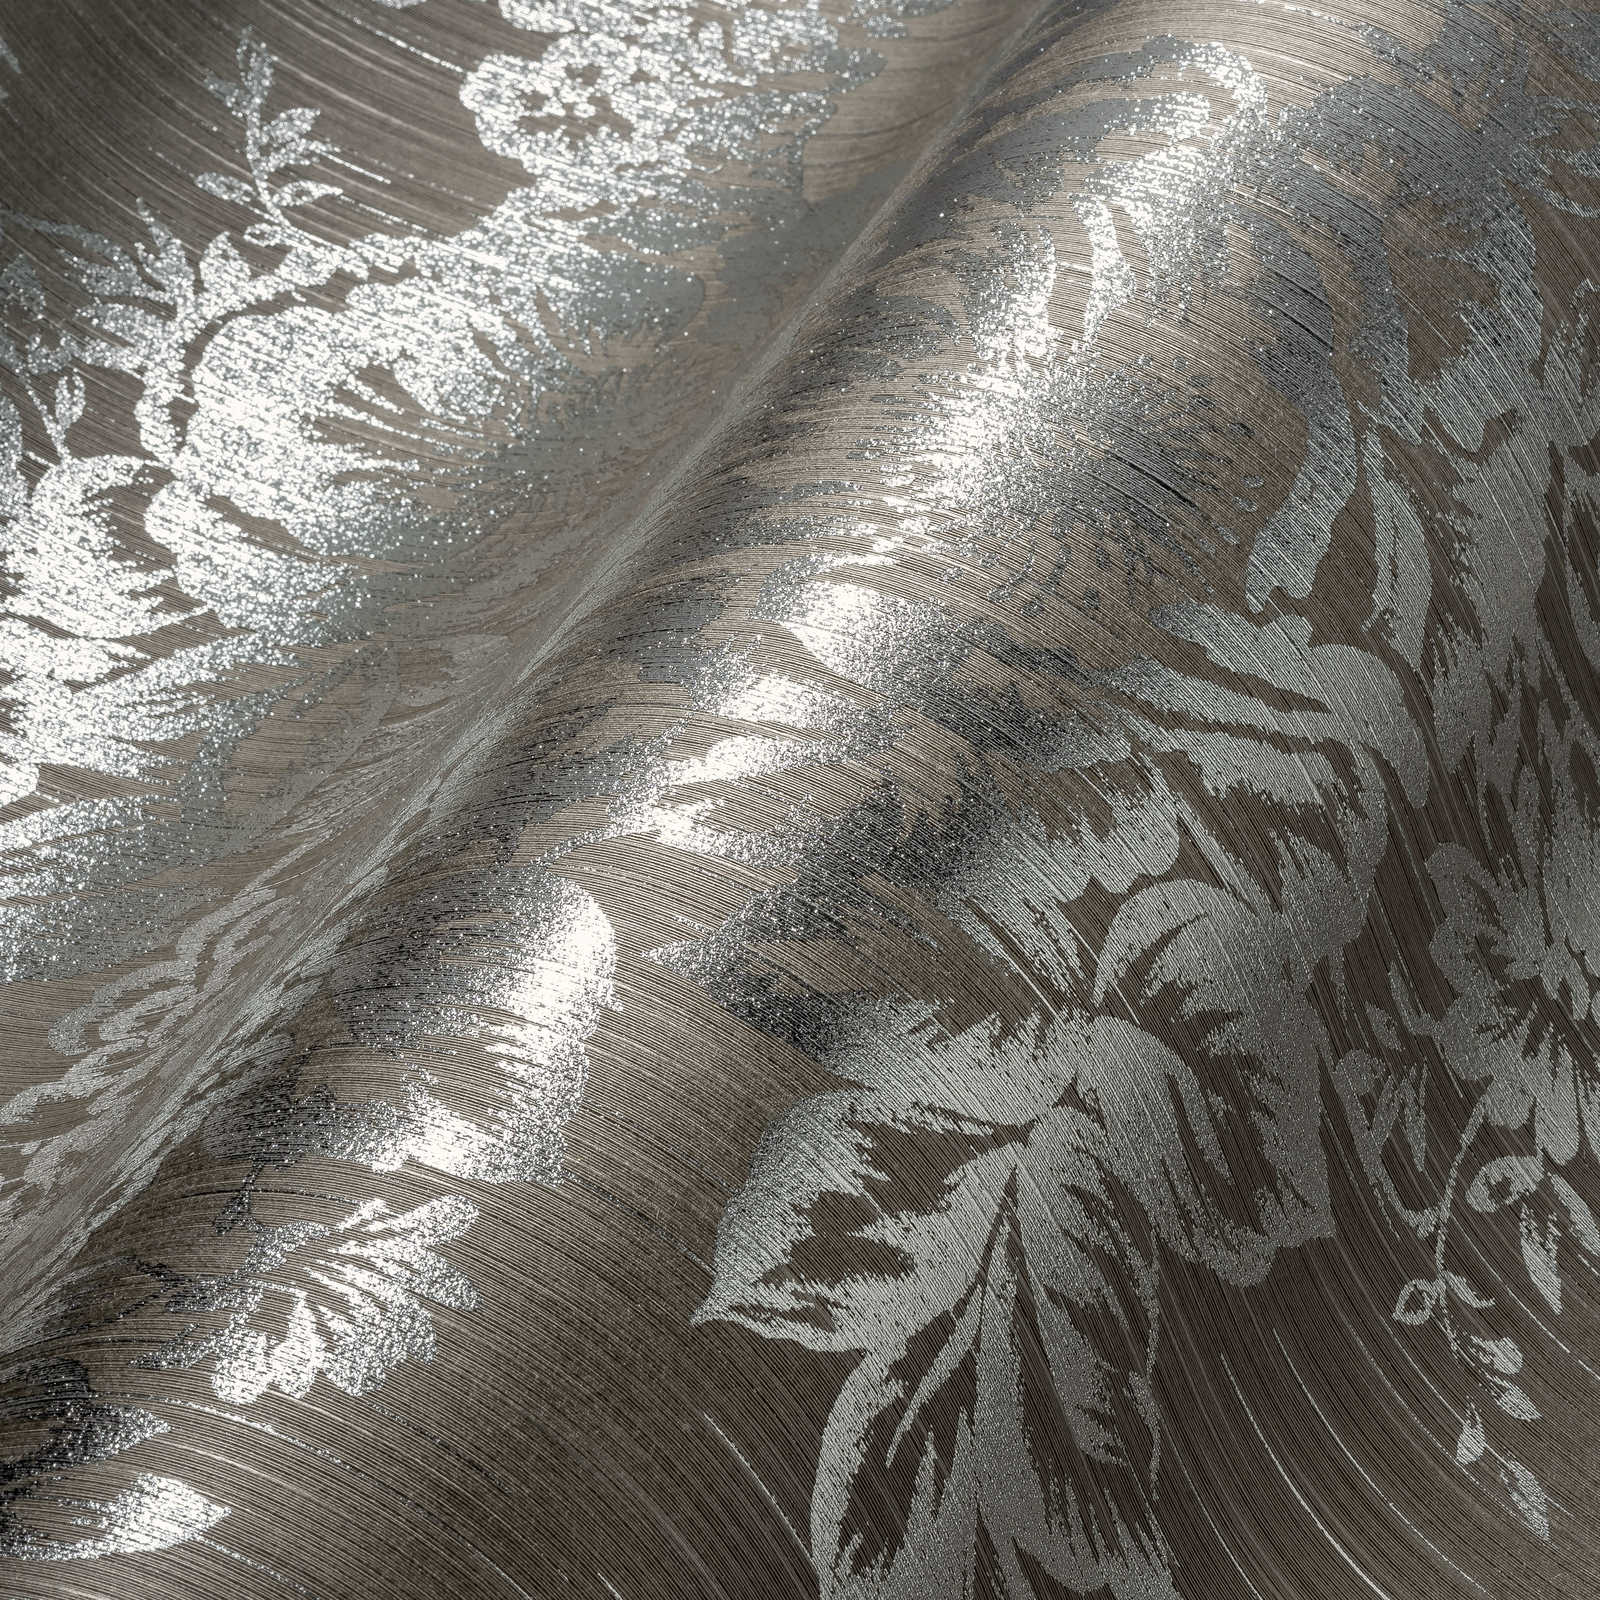             Textured wallpaper with silver floral pattern - silver, brown
        